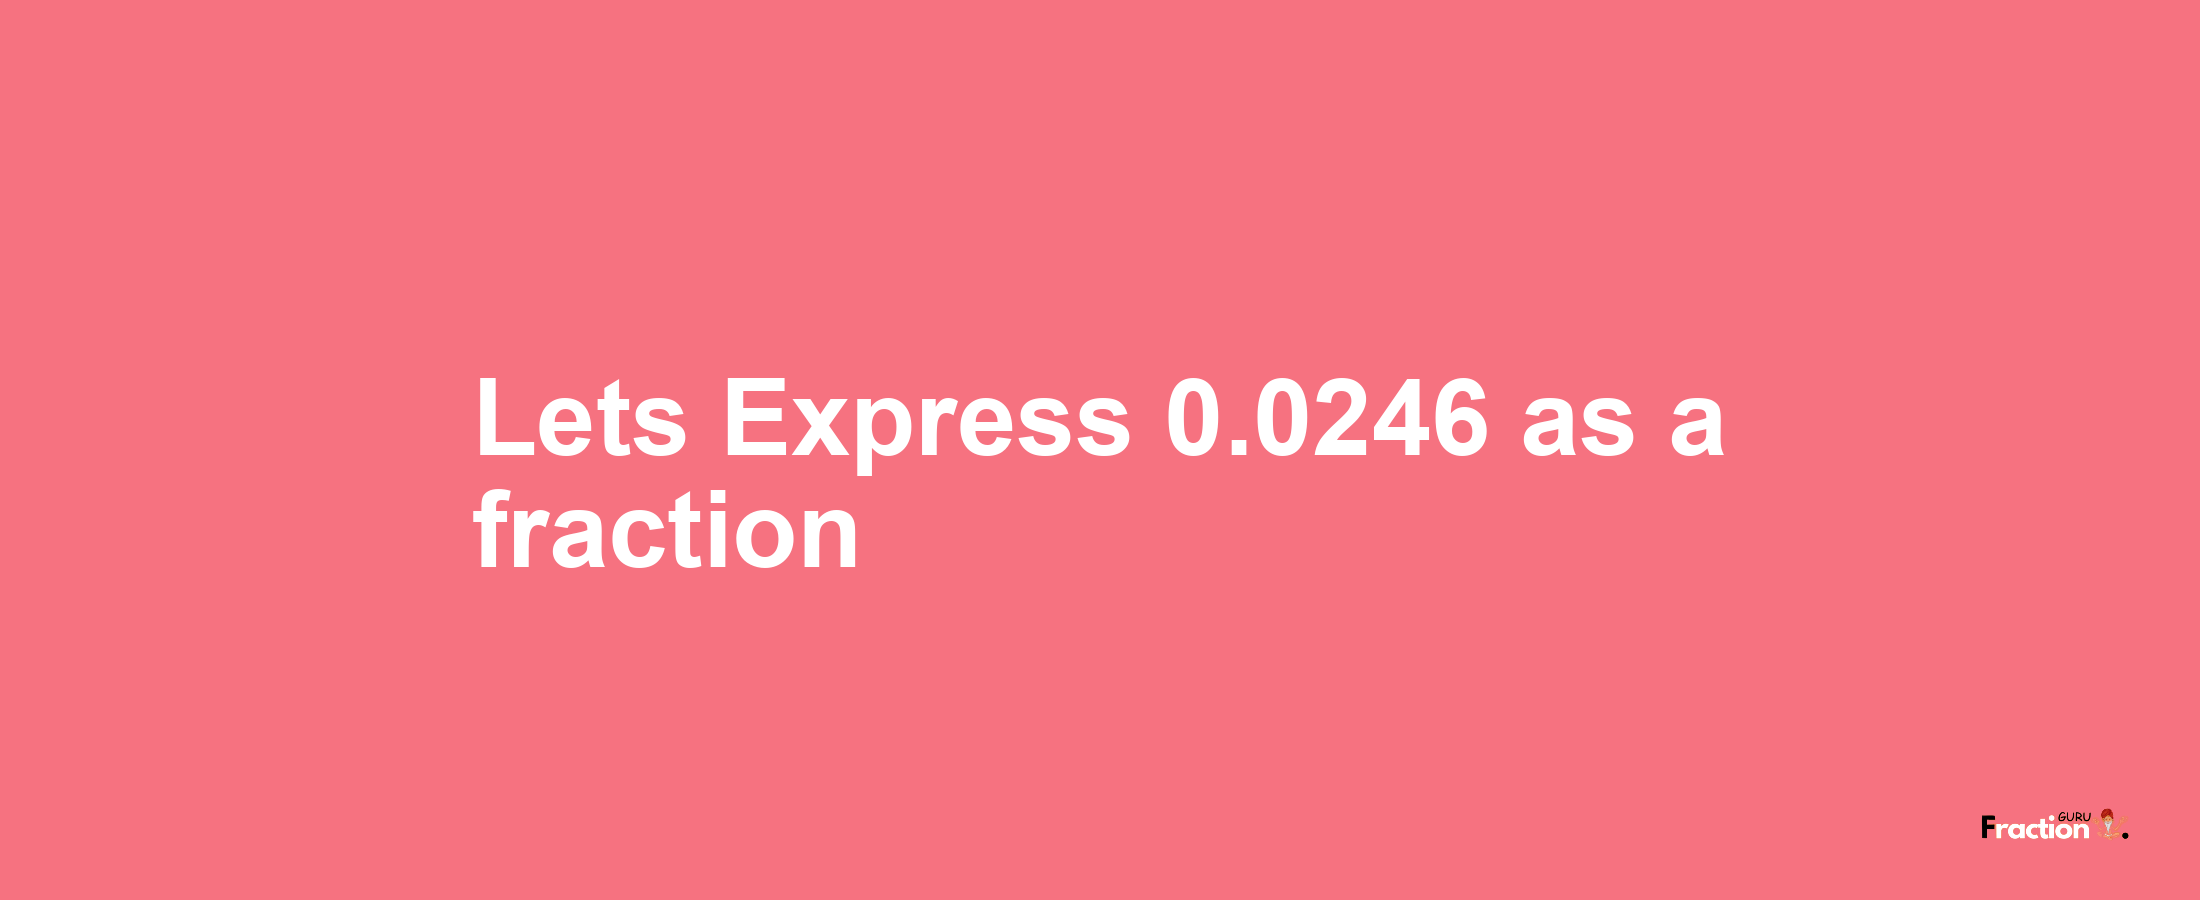 Lets Express 0.0246 as afraction